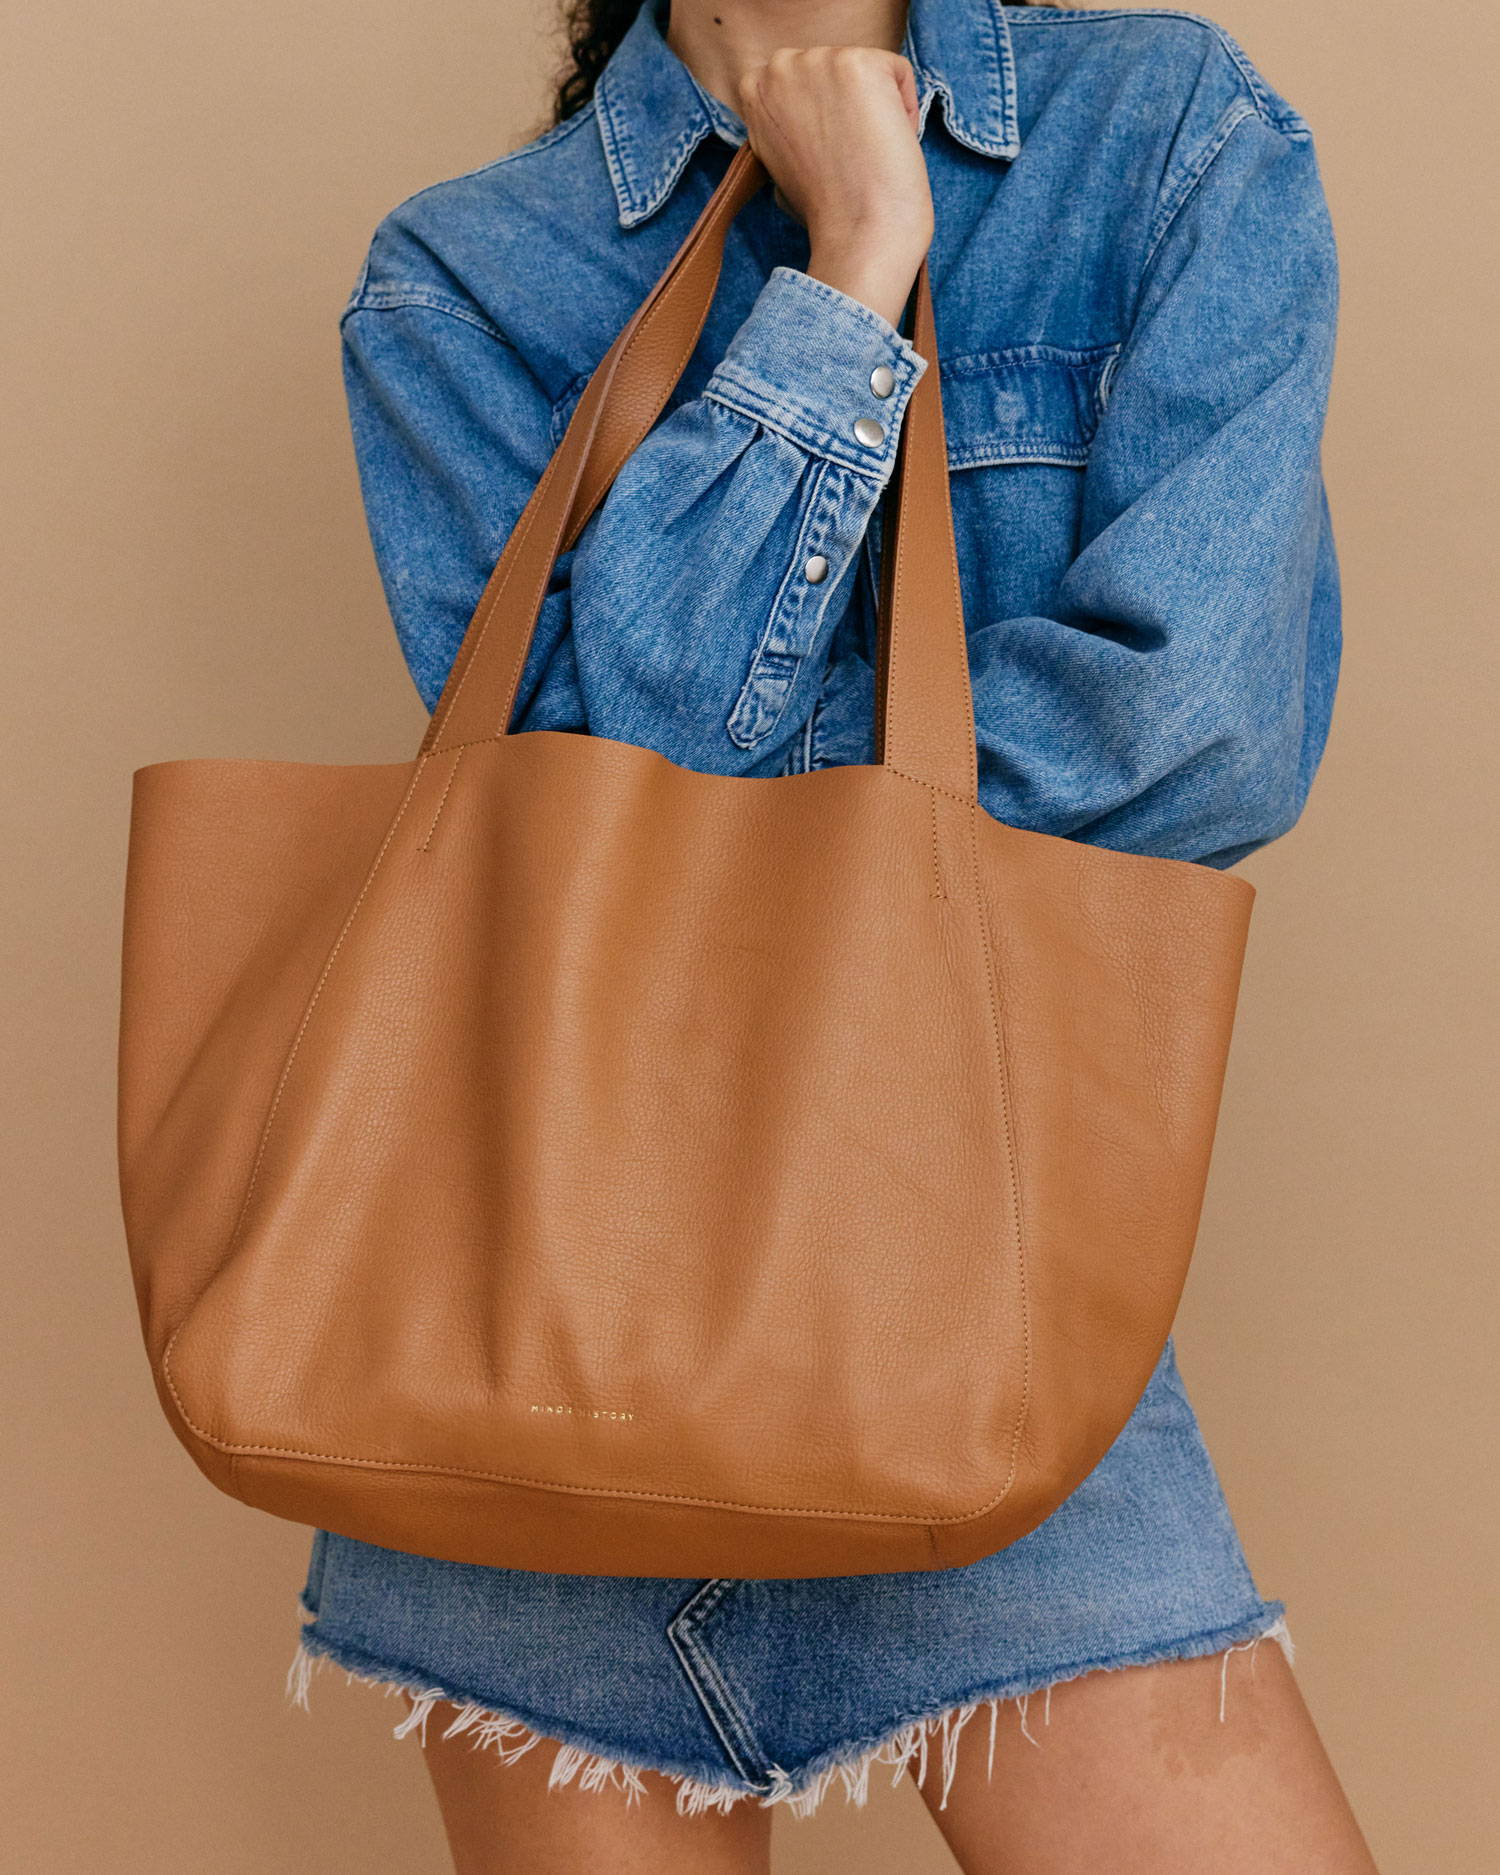 Large soft brown tote with denim skirt